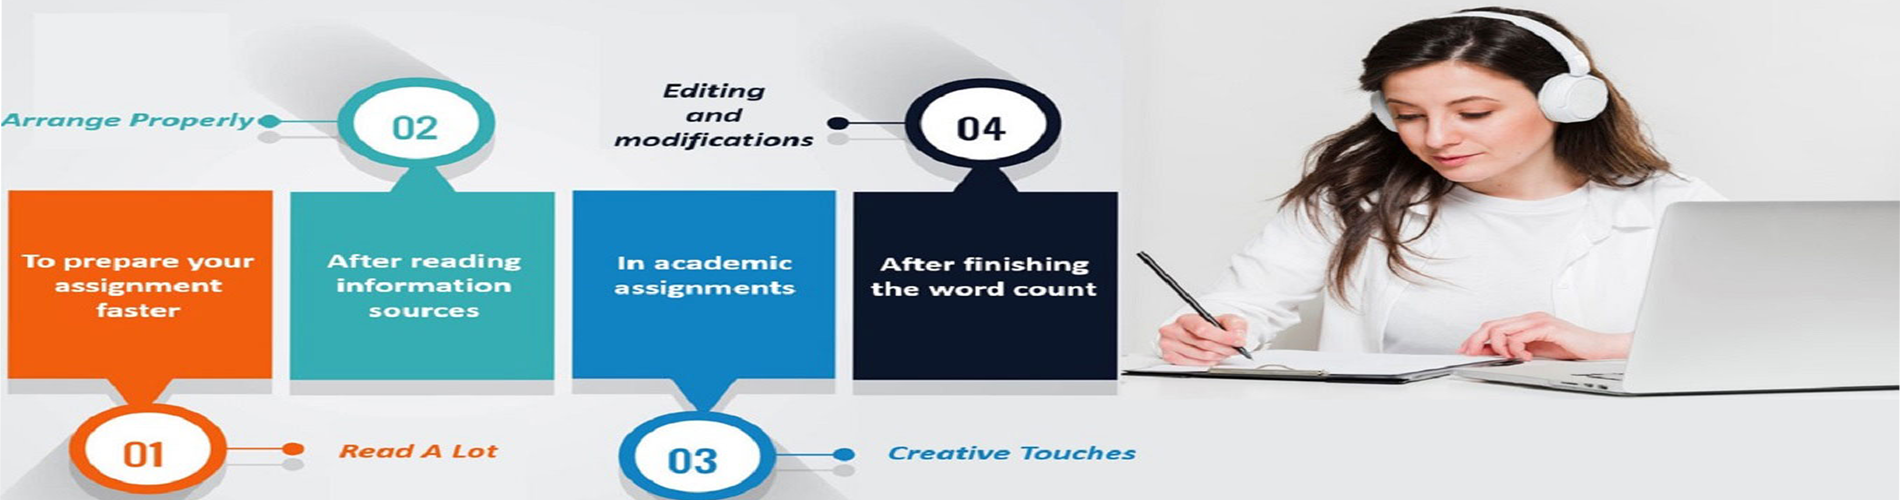 Dissertation writing services malaysia 24